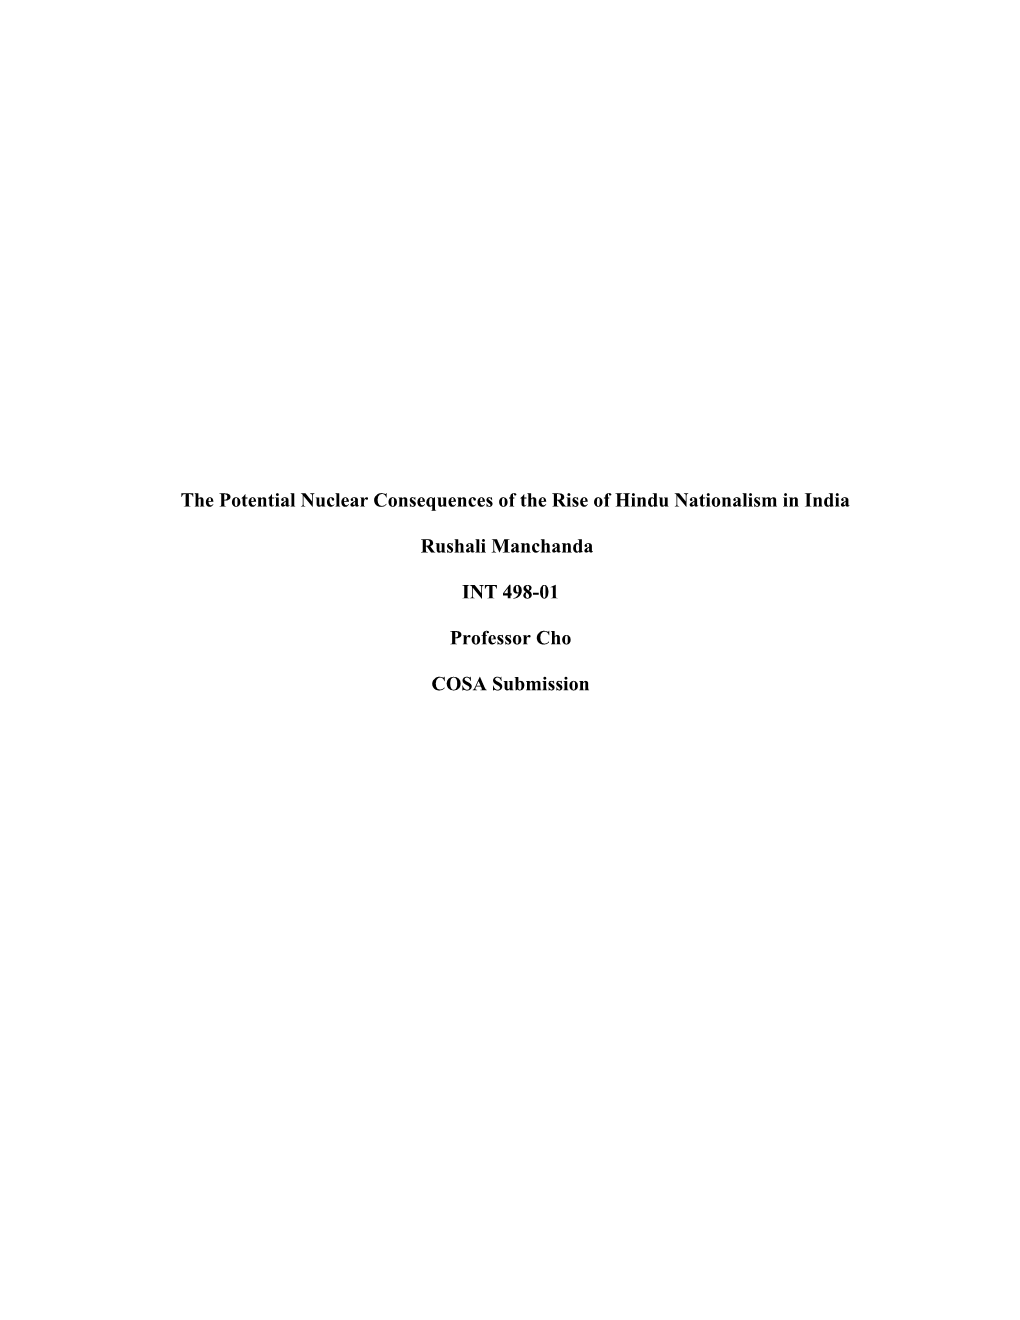 The Potential Nuclear Consequences of the Rise of Hindu Nationalism in India